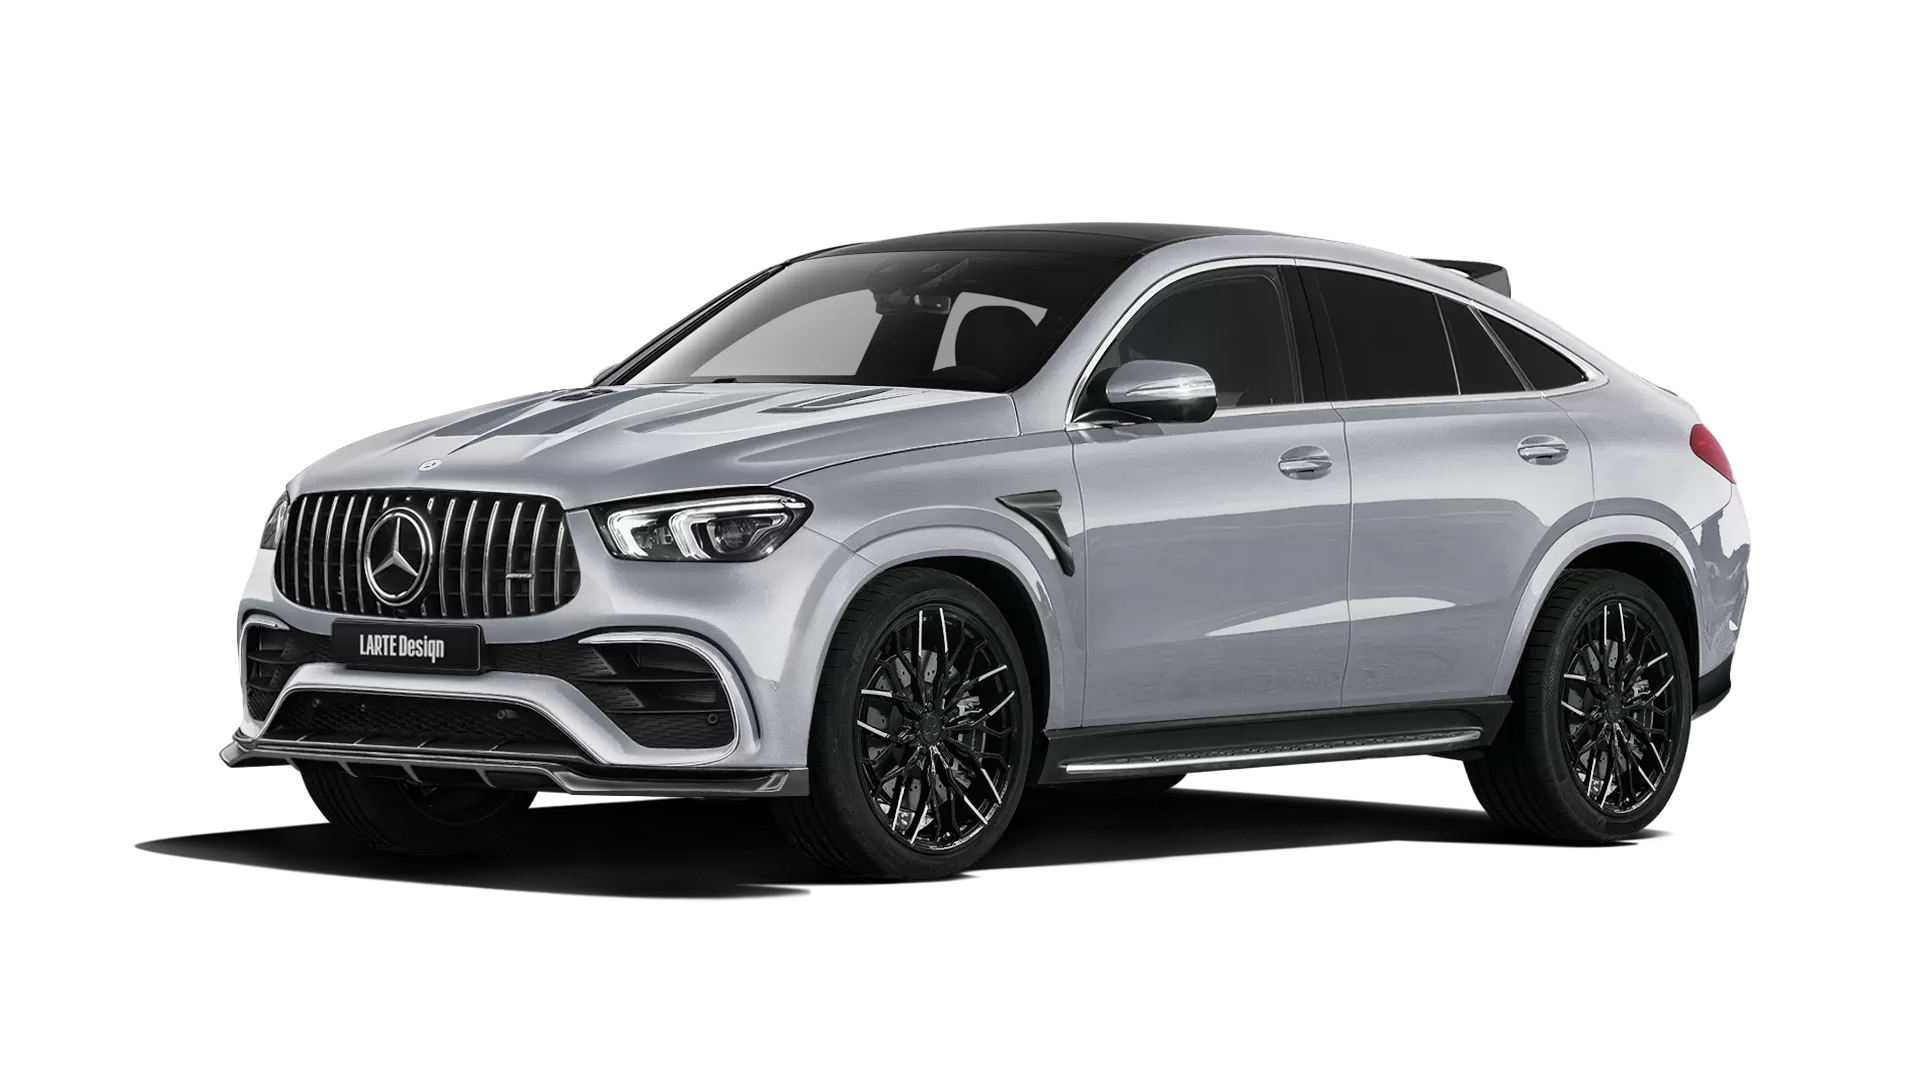 Mercedes GLE Coupe AMG 63 C167 with painted body kit: front view shown in High Tech Silver